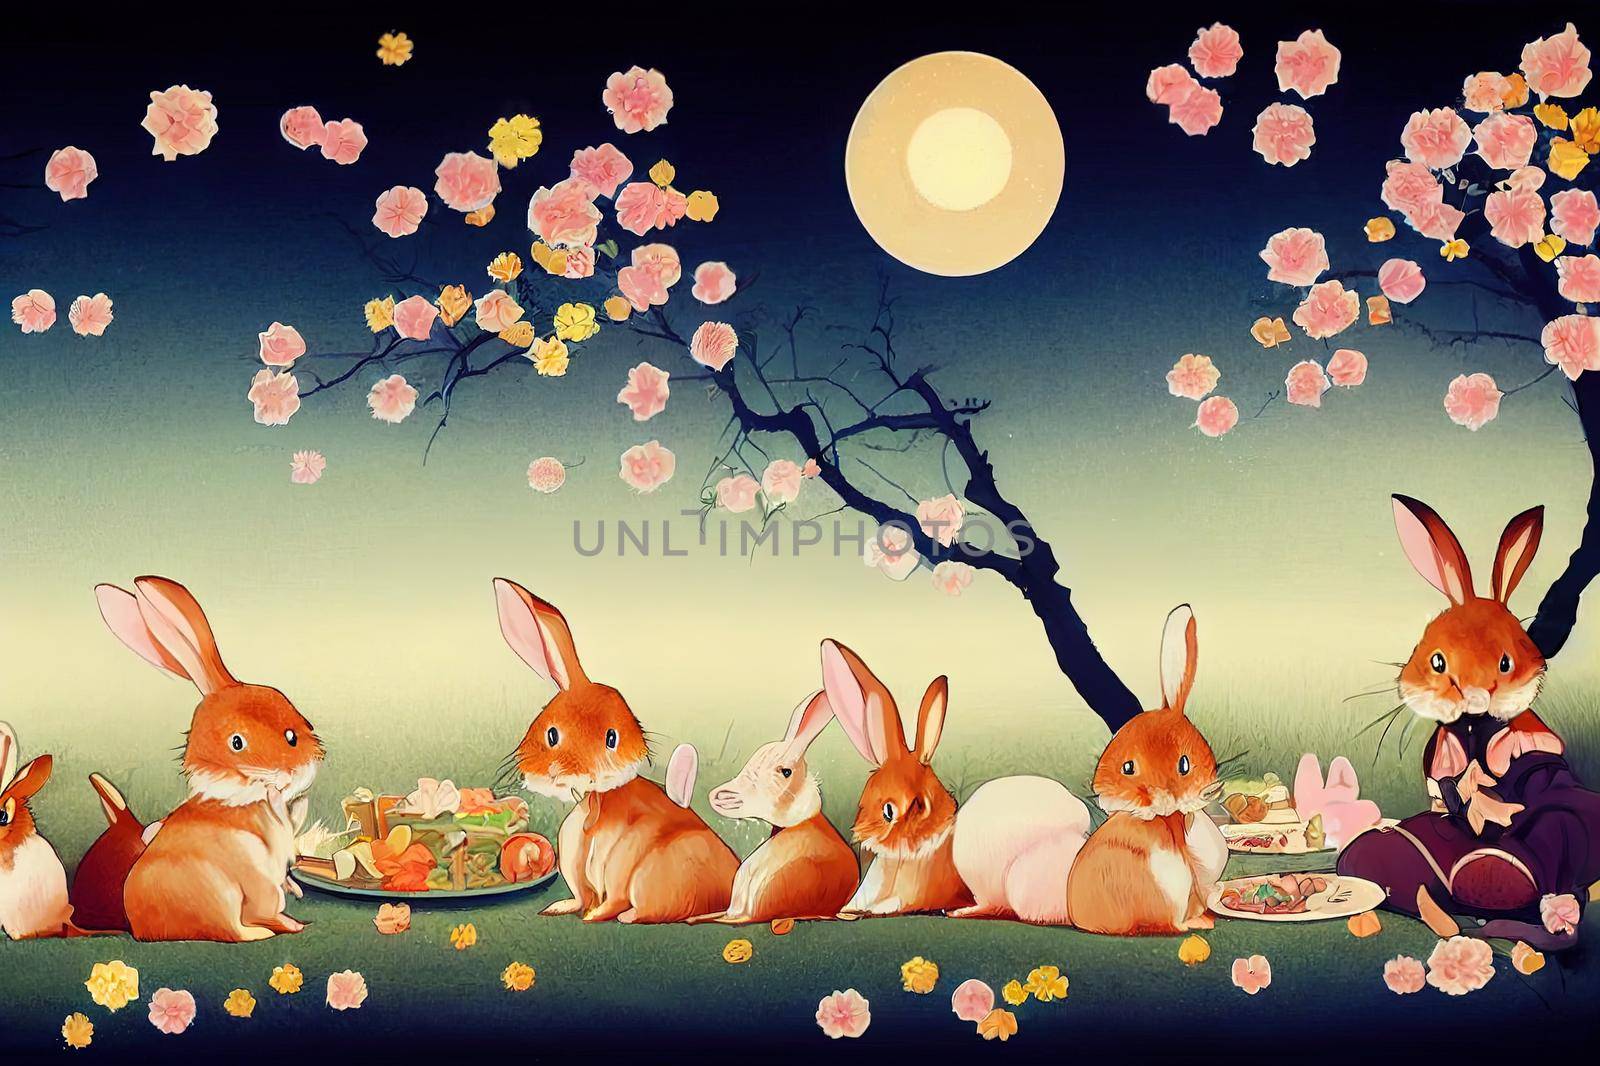 Cute rabbits picnicking under the romantic moonlight with falling High quality 2d illustration. by 2ragon